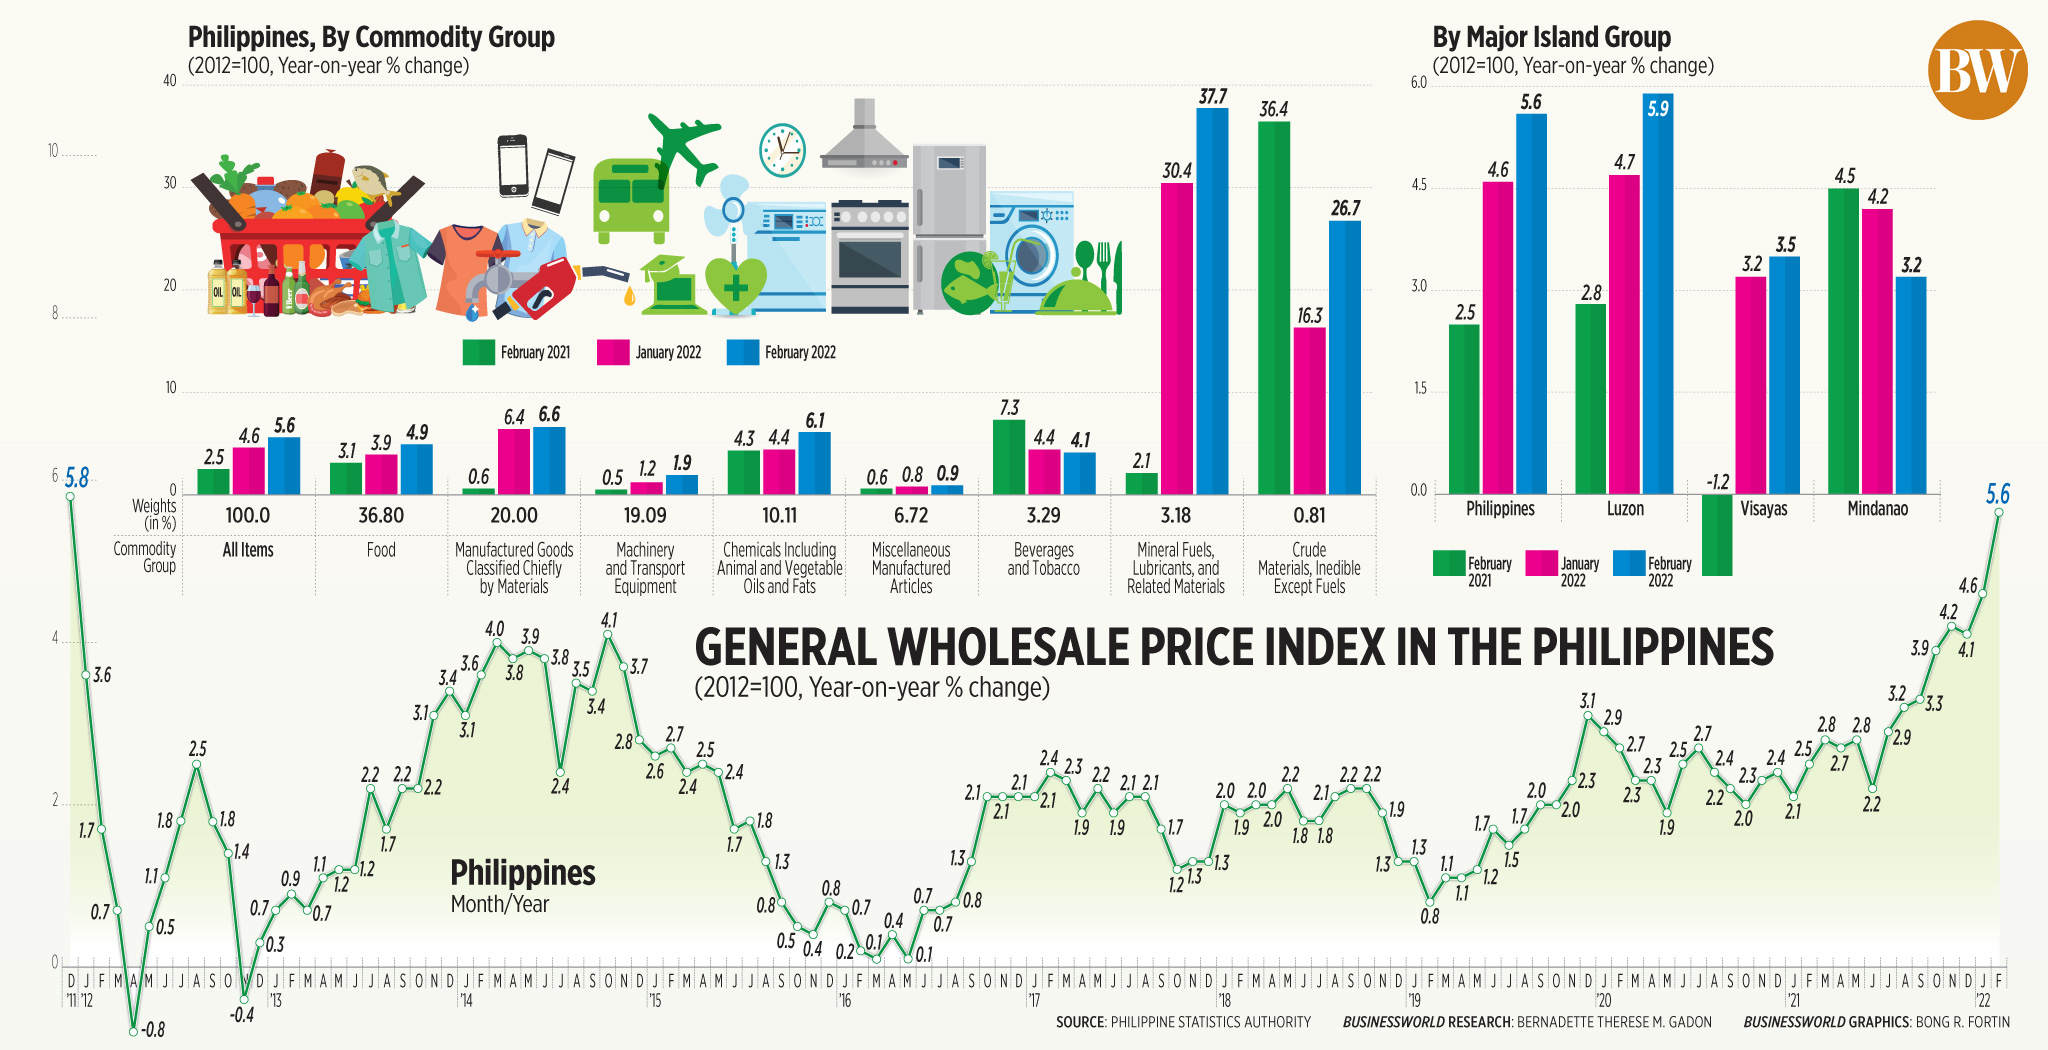 General Wholesale Price Index in the Philippines